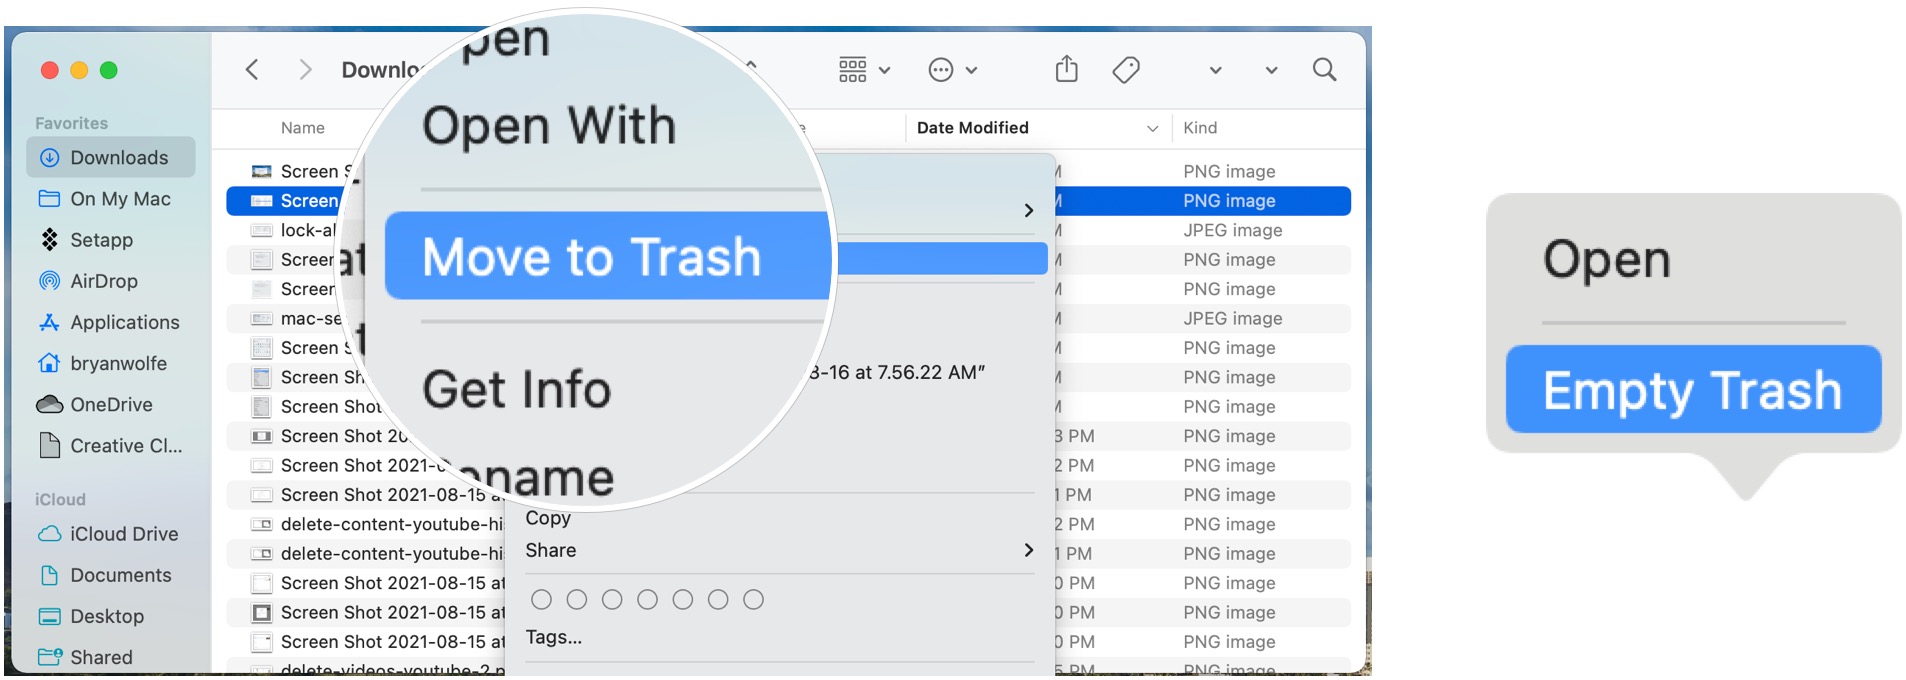 To delete downloaded files, go into the Downloads folder, then delete those files not necessary. Empty the Mac Trash.